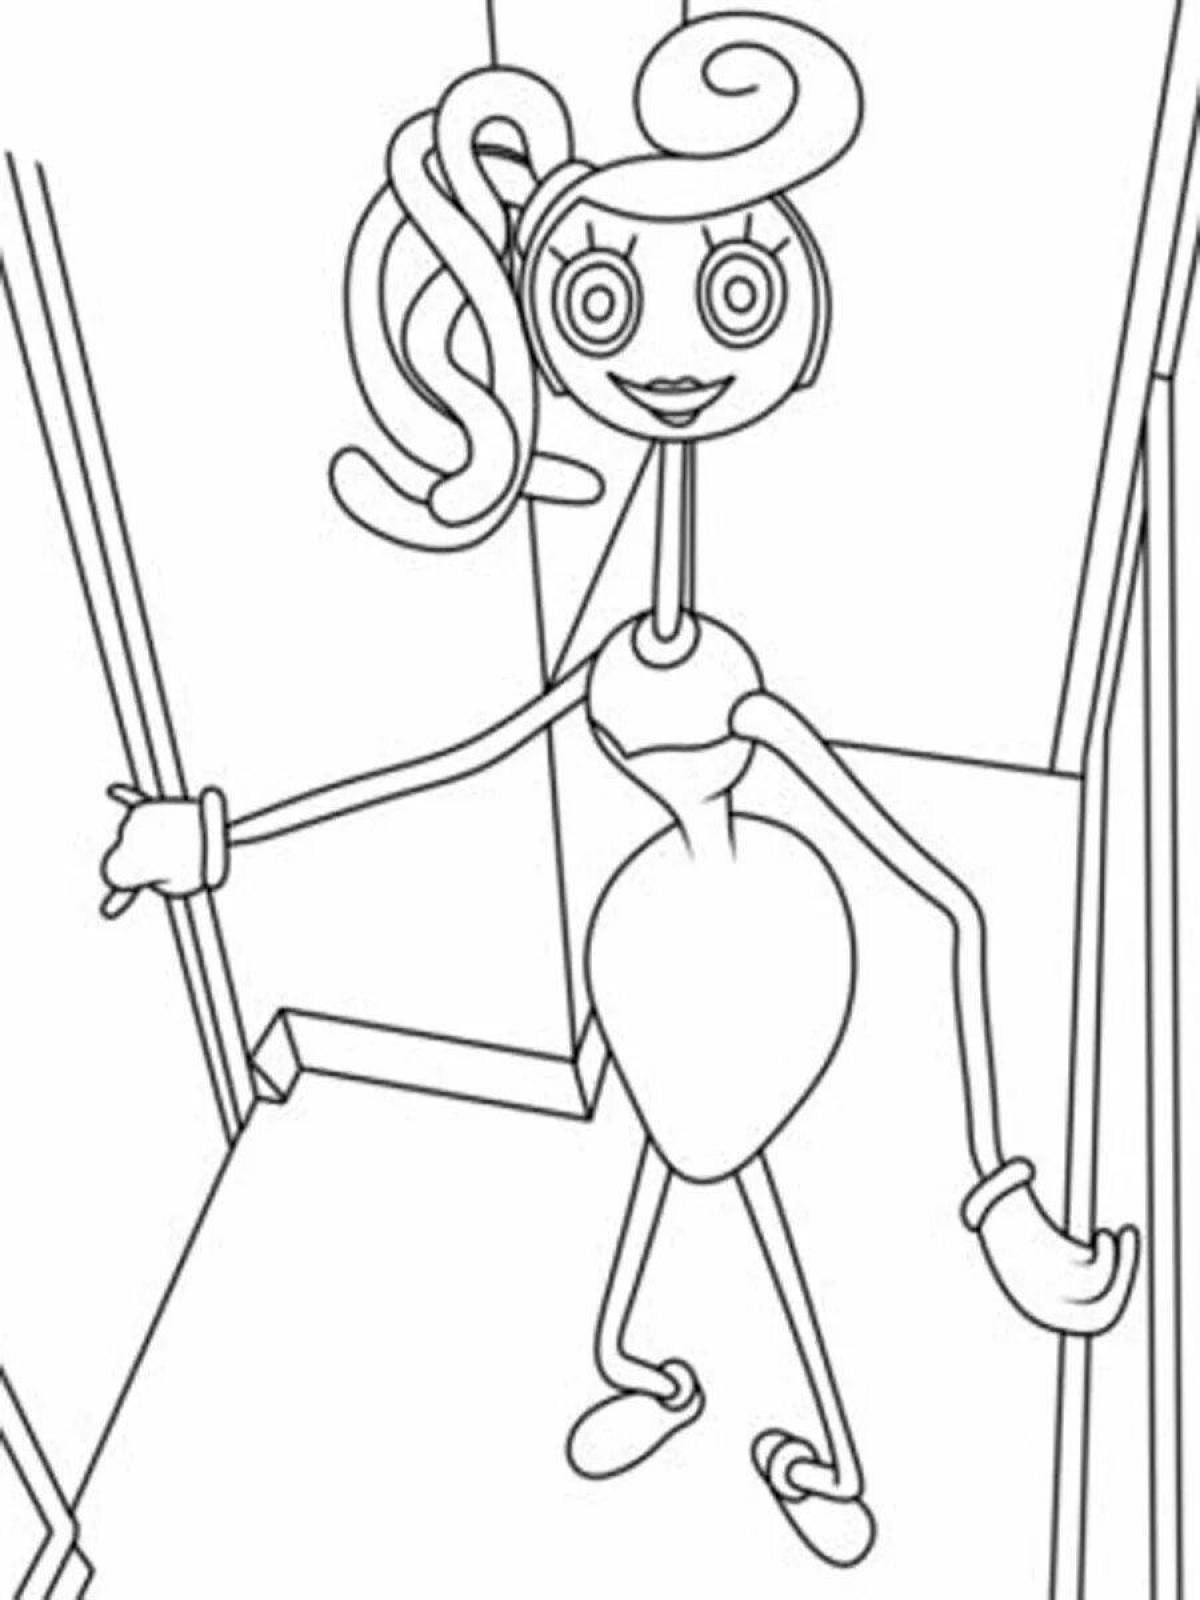 Charming coloring page mom leggy